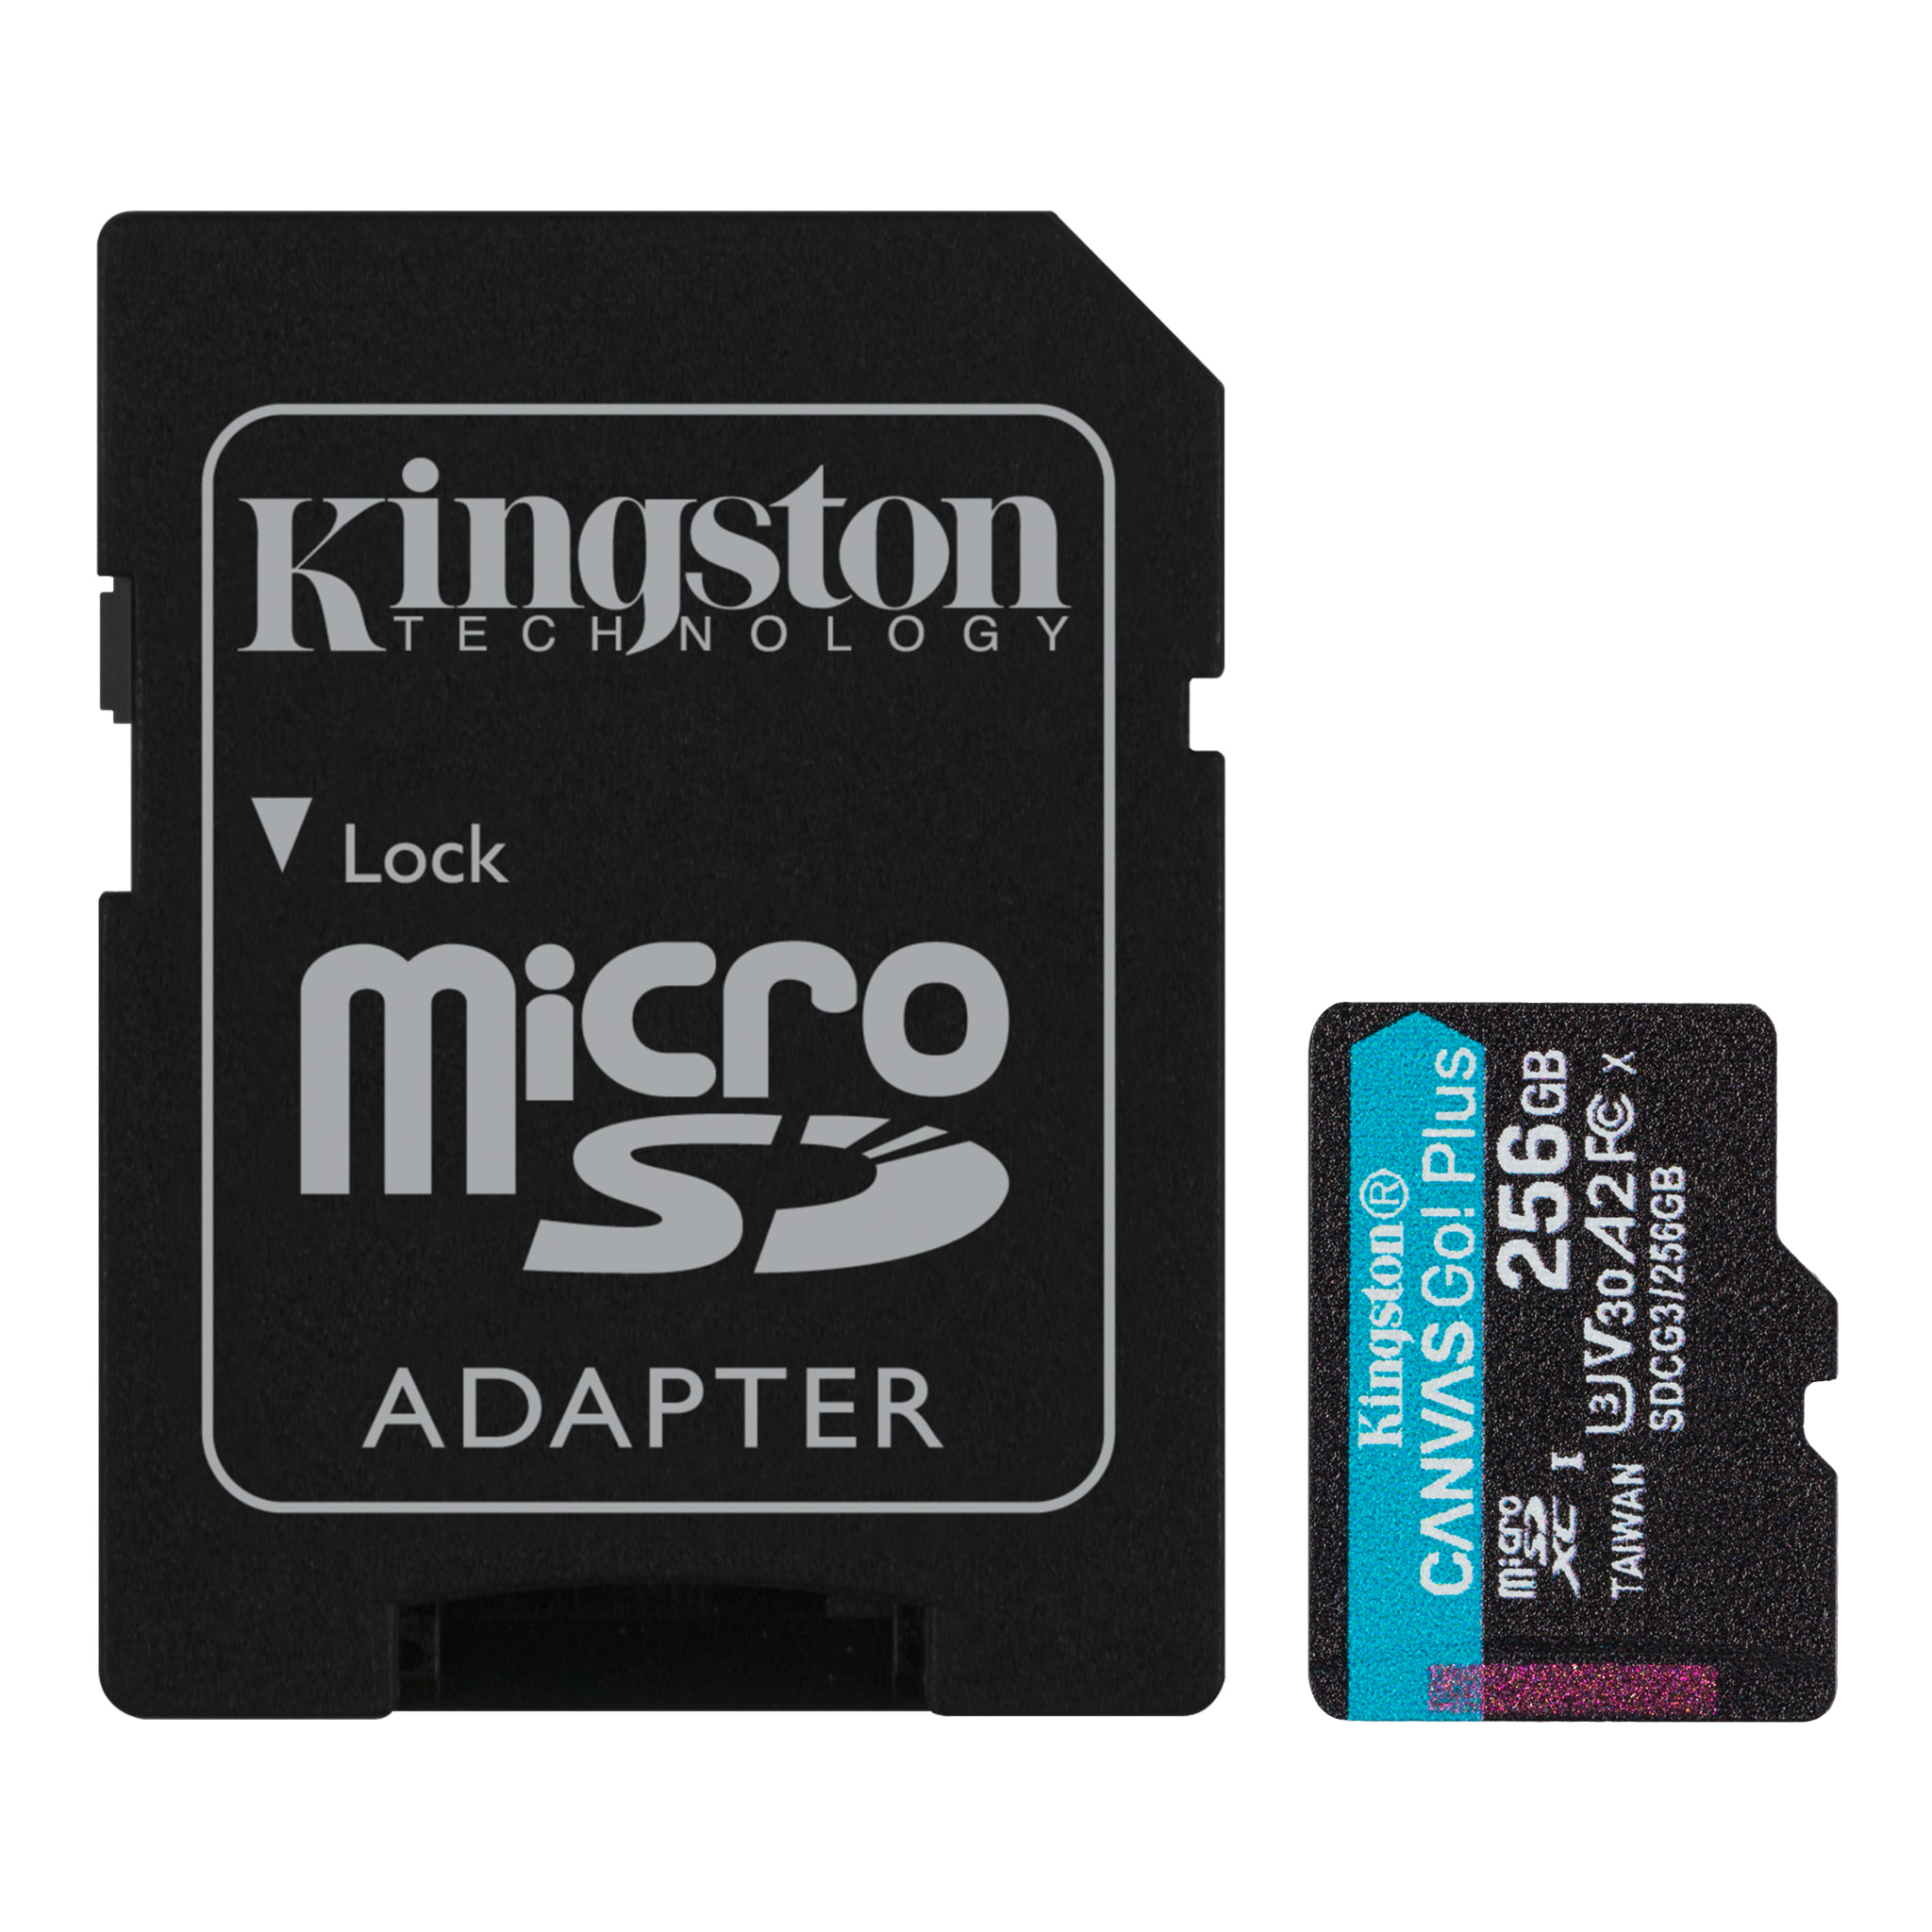 Kingston 512GB Plum D105 MicroSDXC Canvas Select Plus Card Verified by SanFlash. 100MBs Works with Kingston